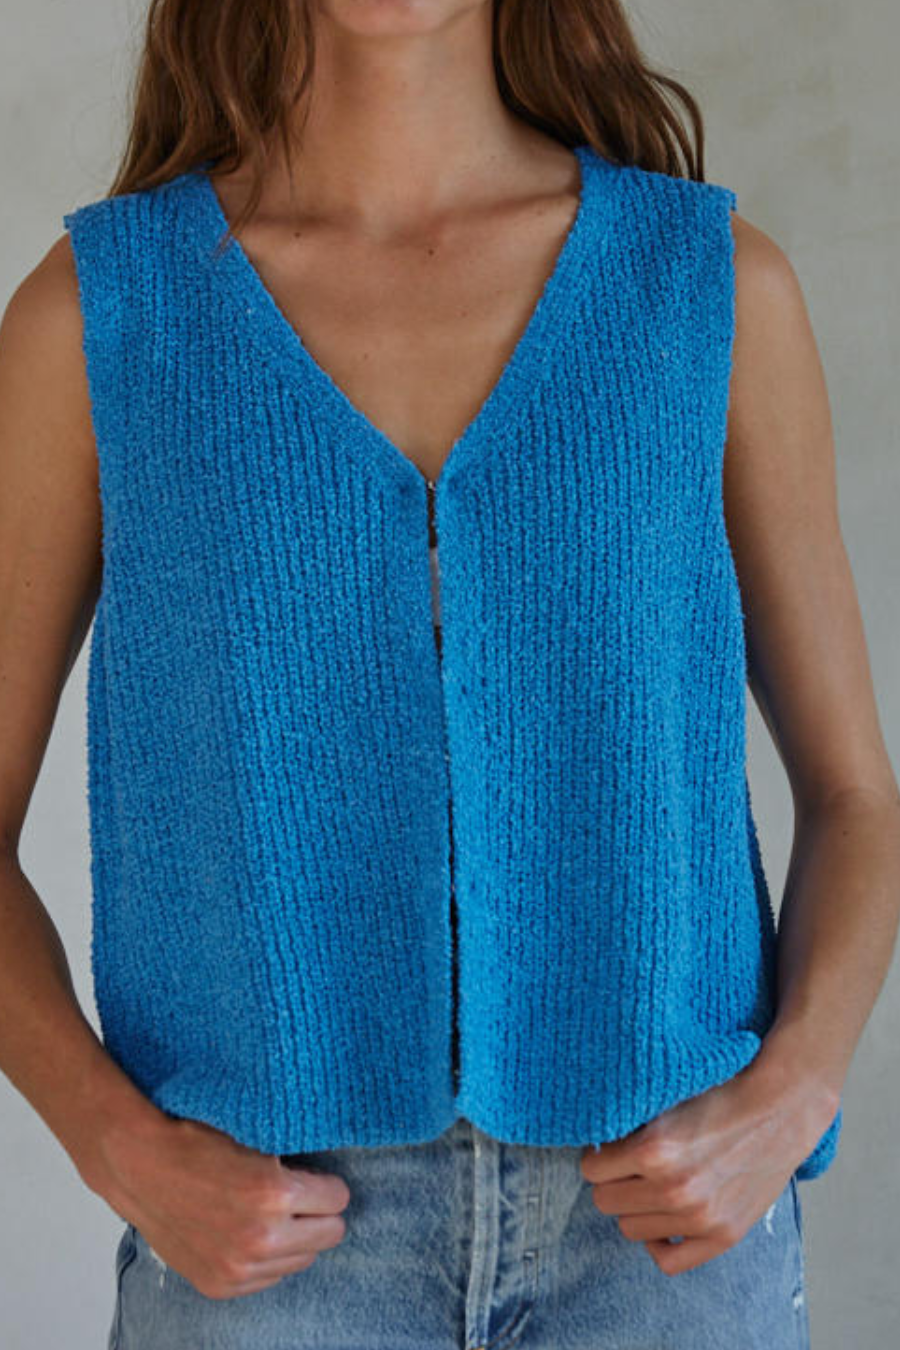 girl wearing knit blue sleeveless sweater top with hook and eye closure. she is wearing it with jeans